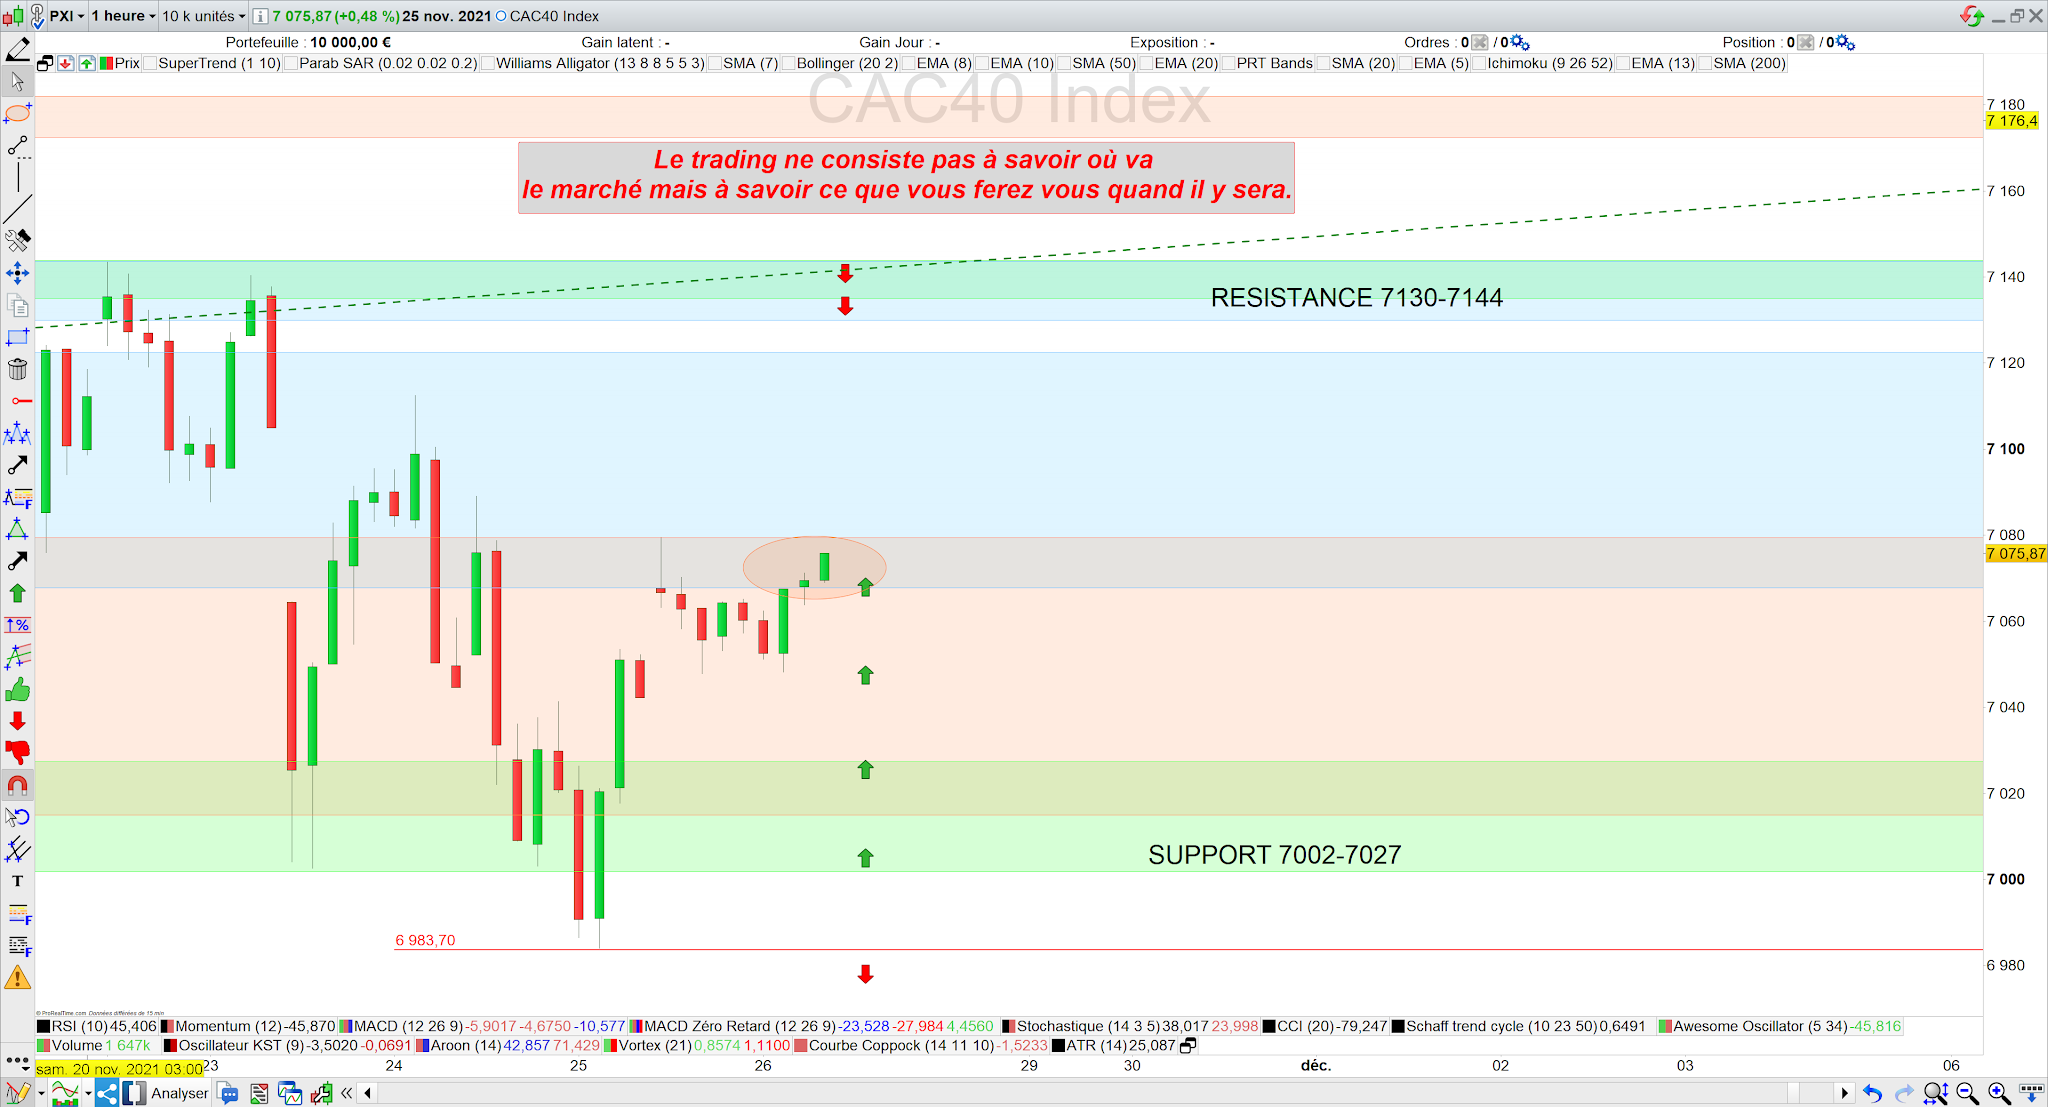 Trading cac40 26/11/21